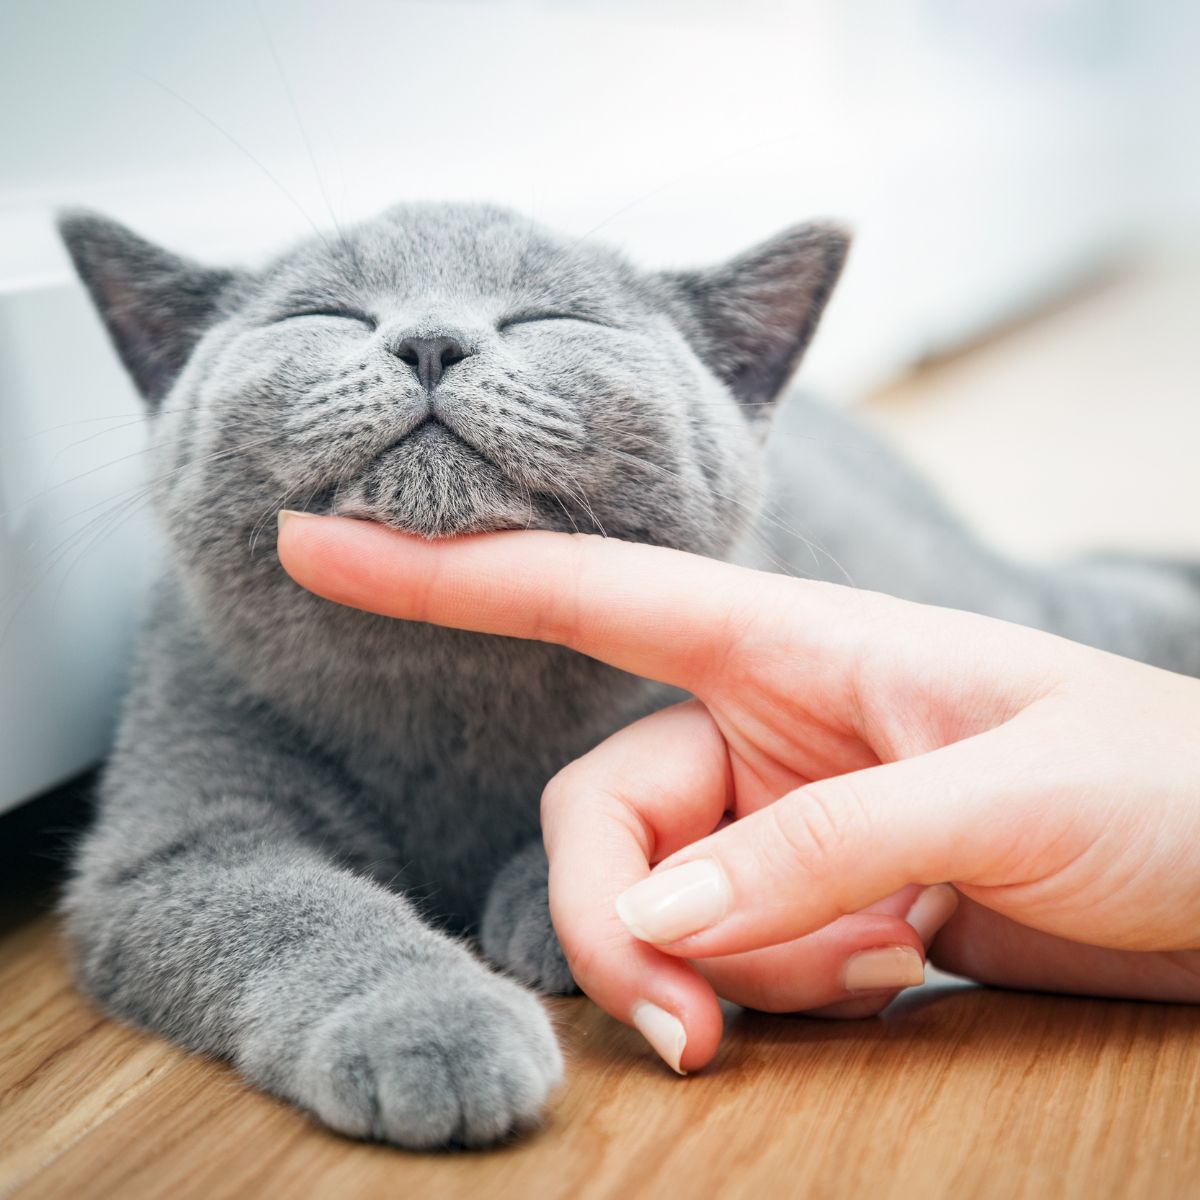 A person's hand gently touching a grey cat's face